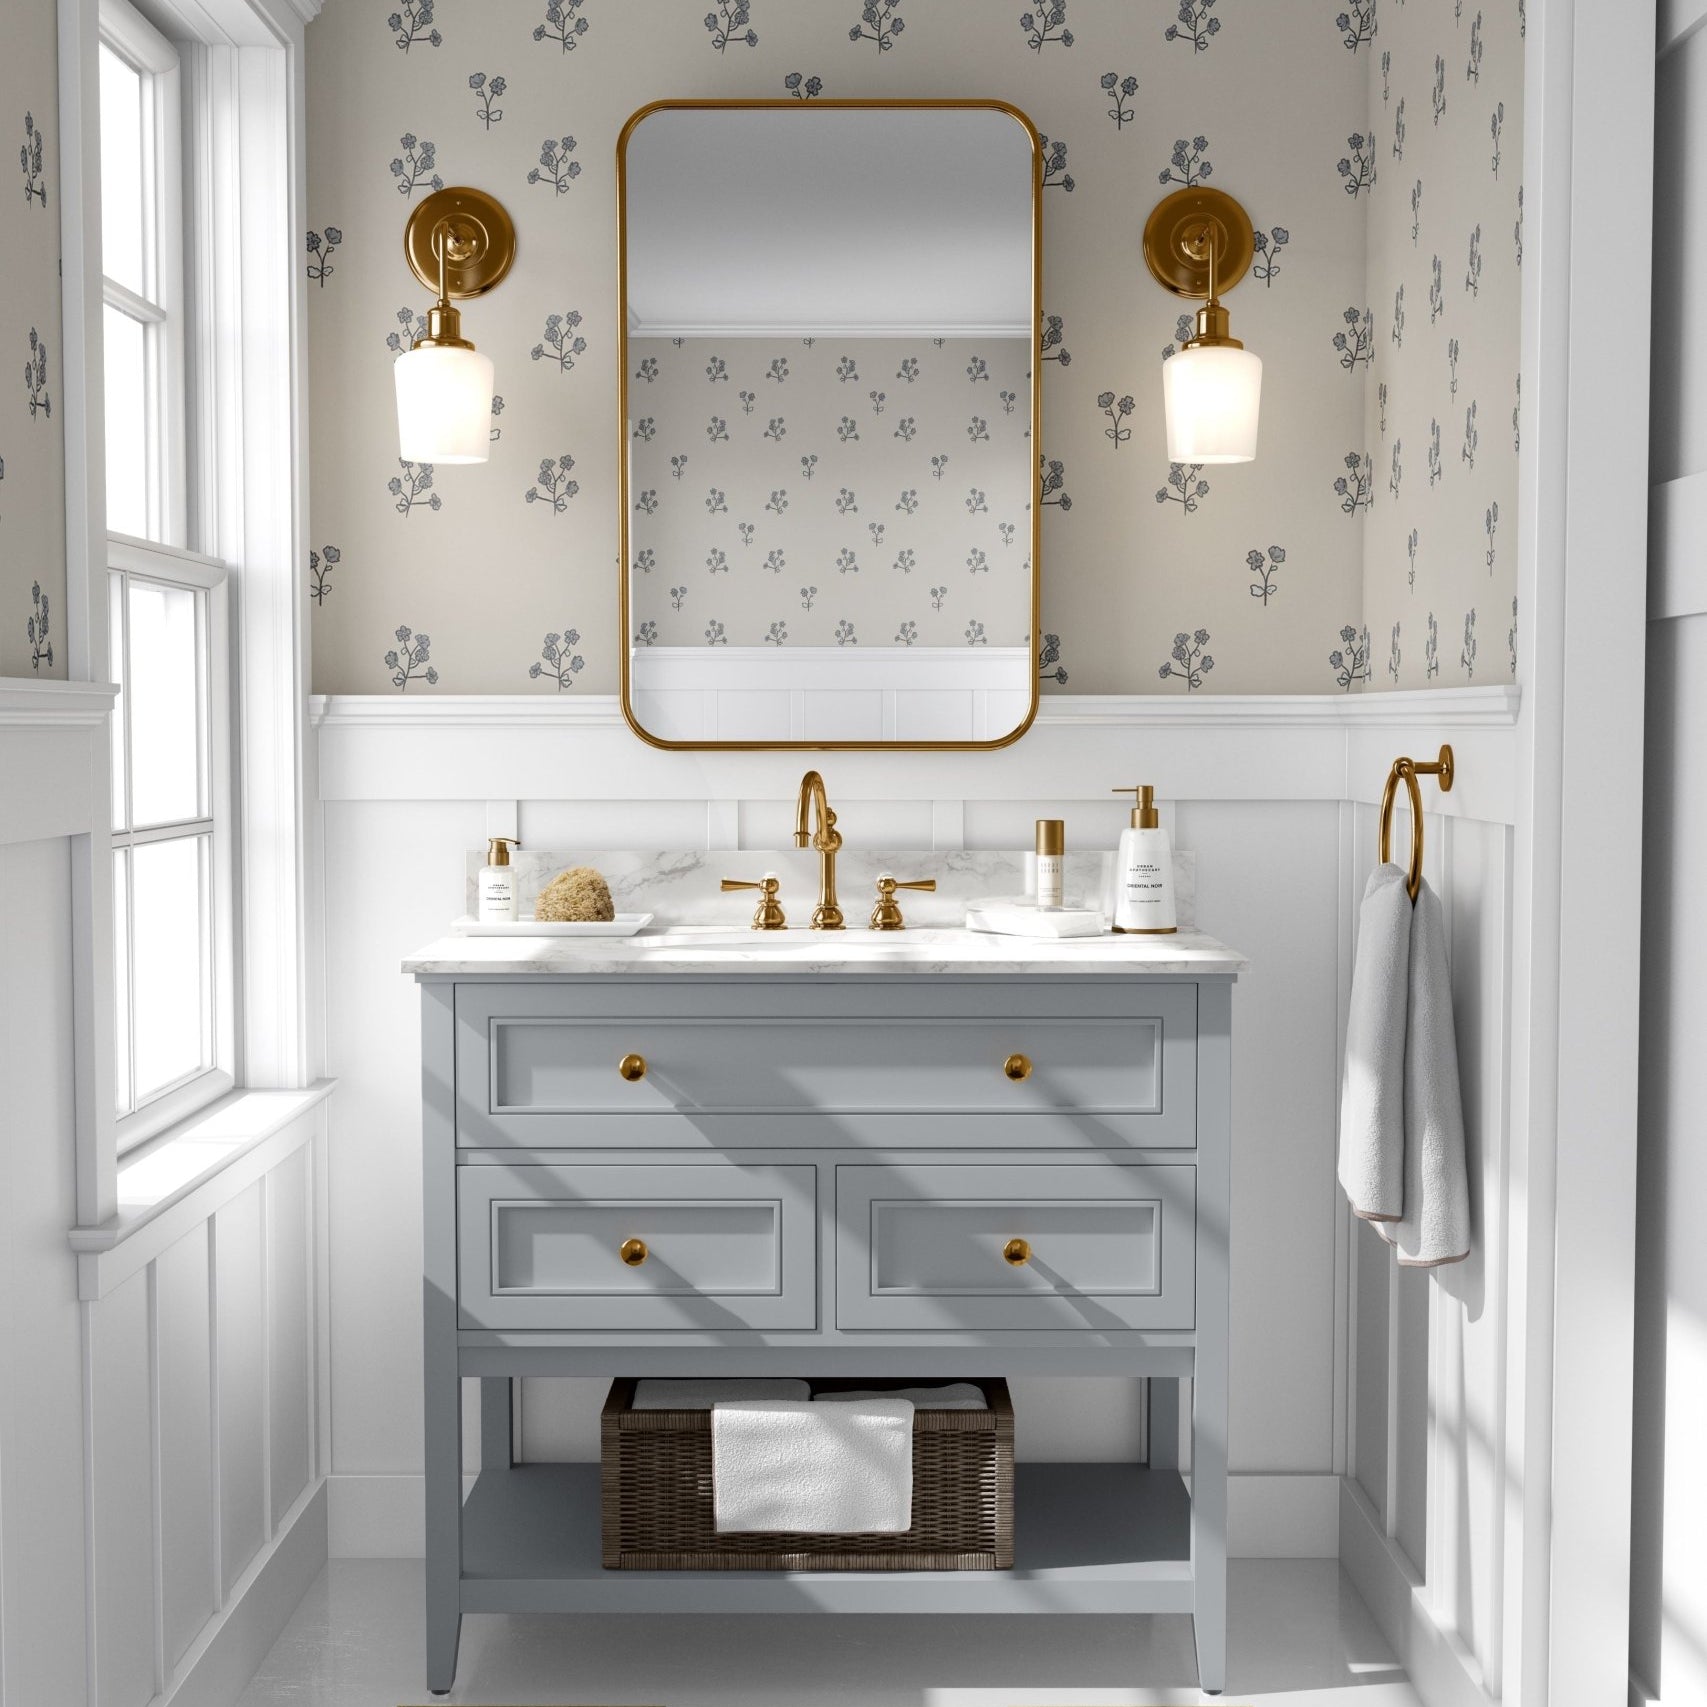 A bright bathroom with walls covered in bluebell flower wallpaper matching the previous image. The room features a light blue vanity with golden knobs, a marble top, golden faucets, and a large mirror with a golden frame.